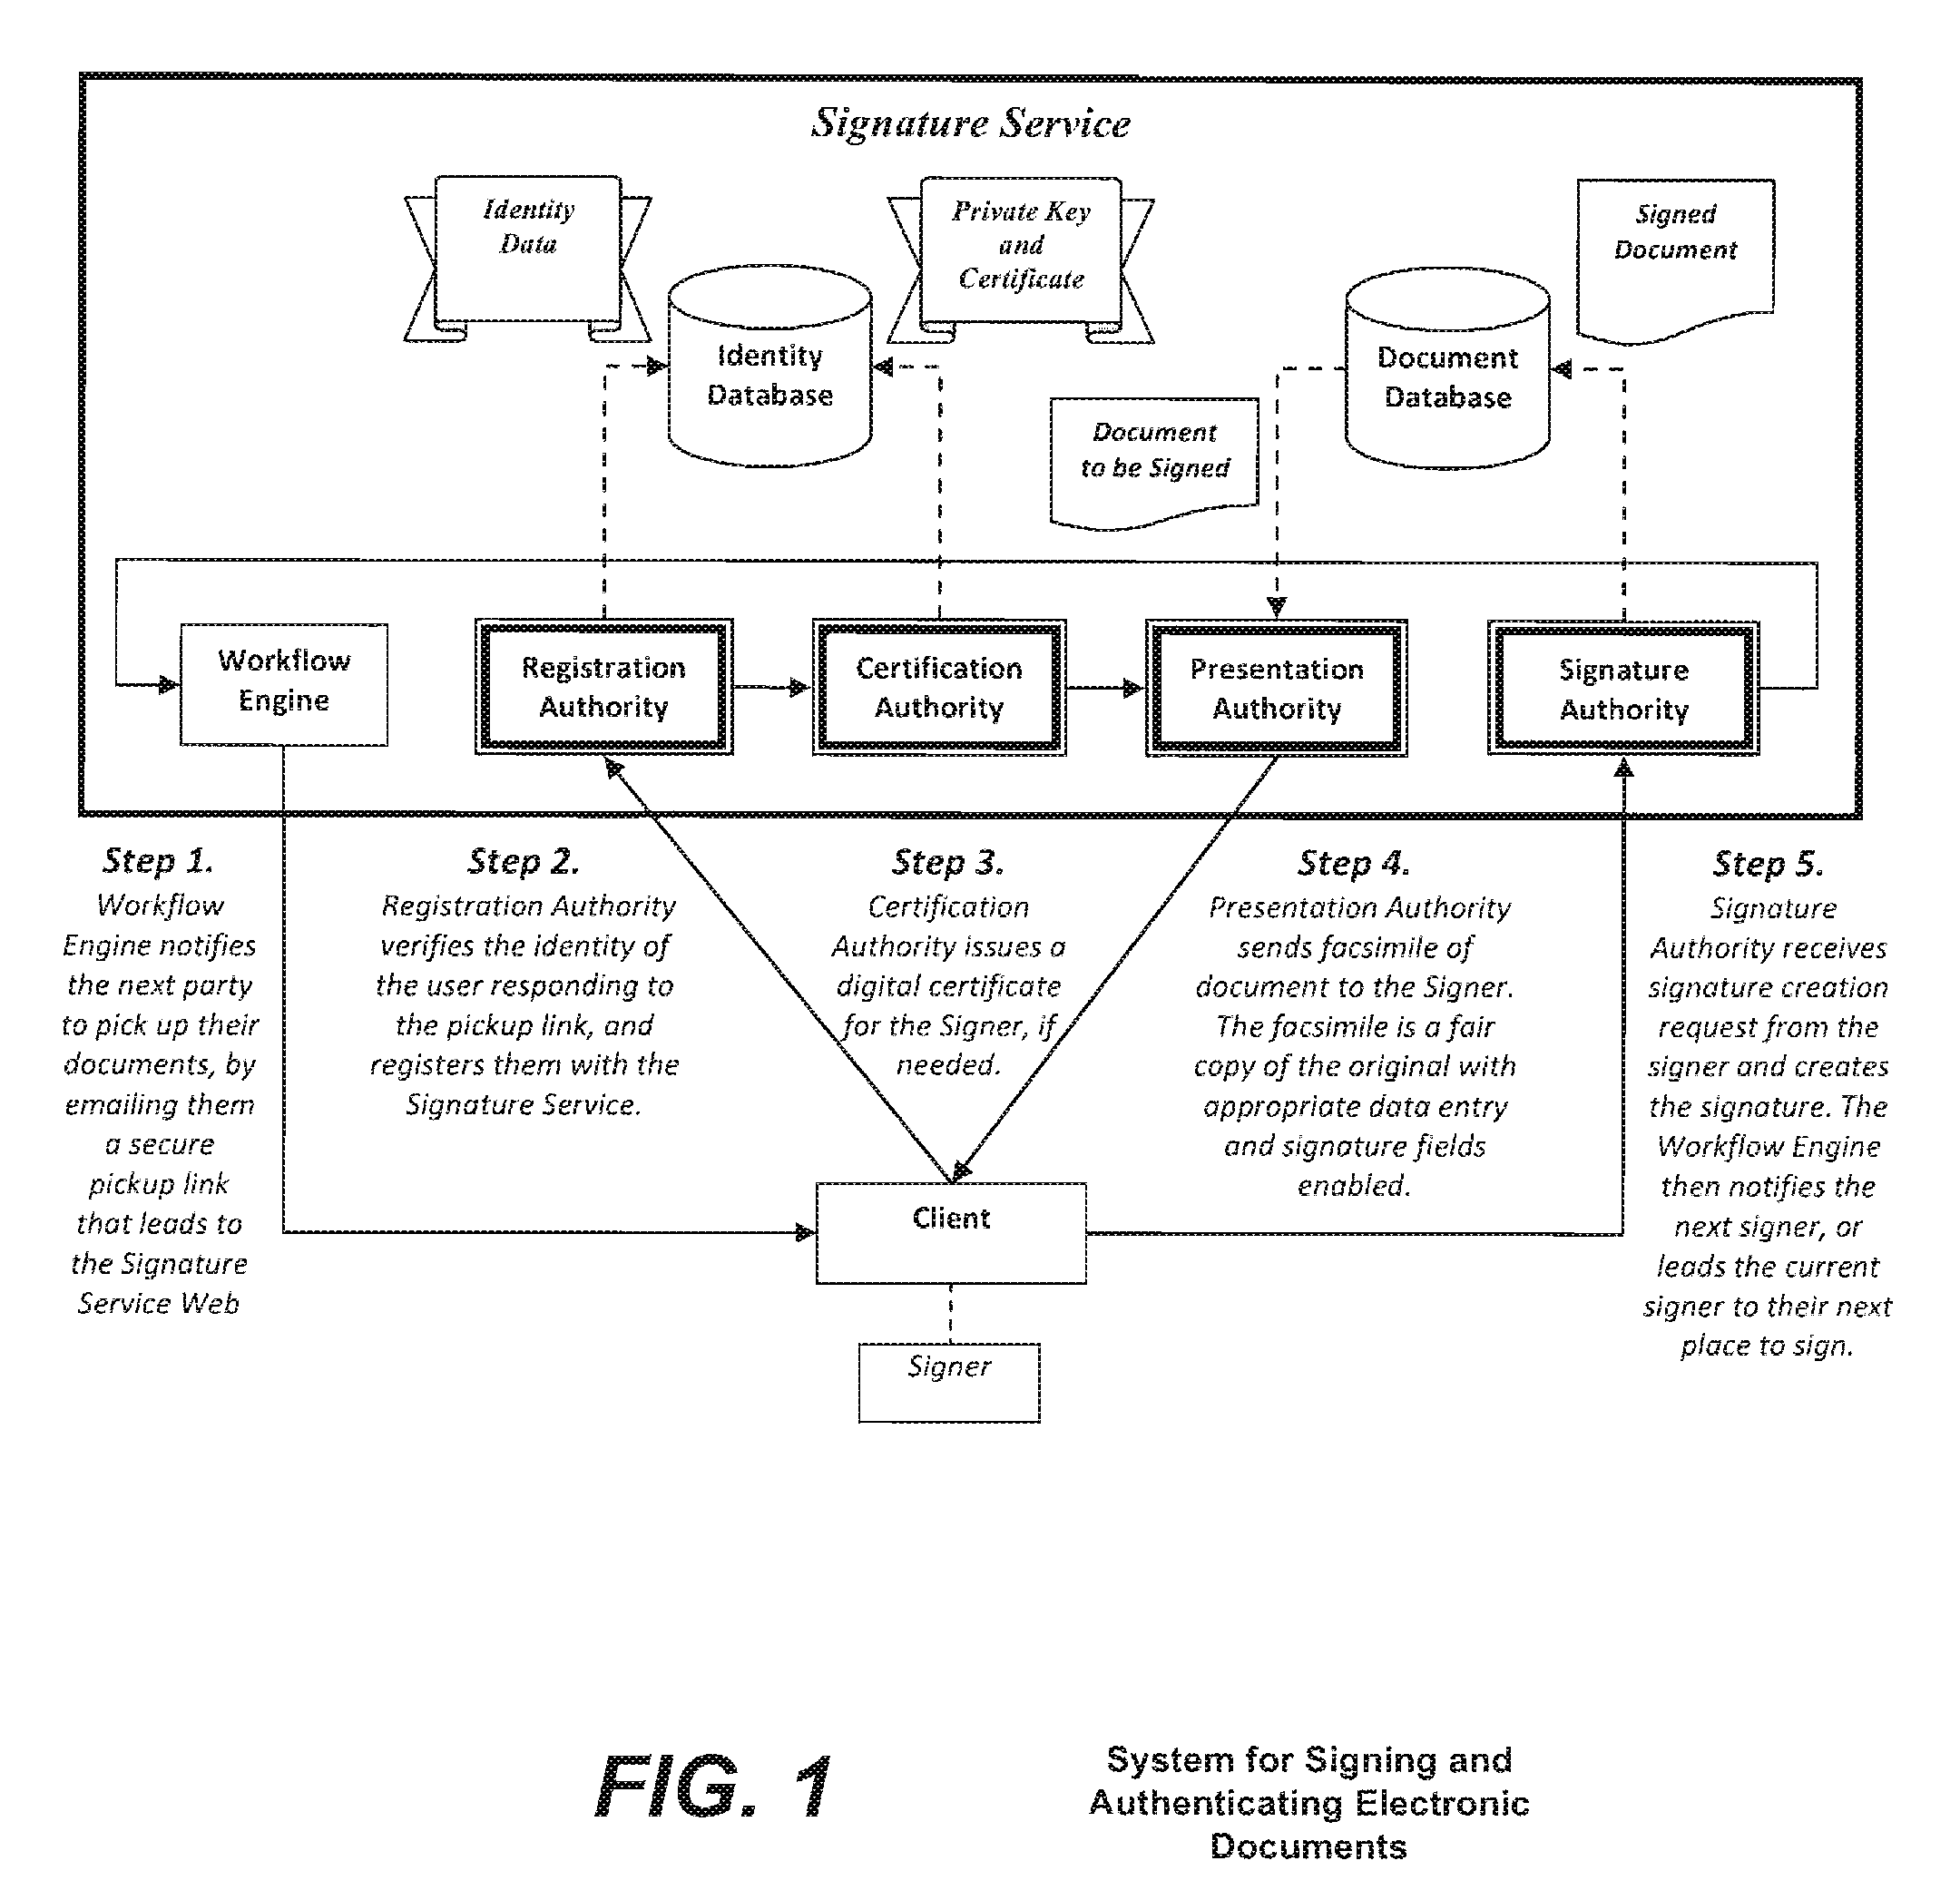 Method and system for signing and authenticating electronic documents via a signature authority which may act in concert with software controlled by the signer